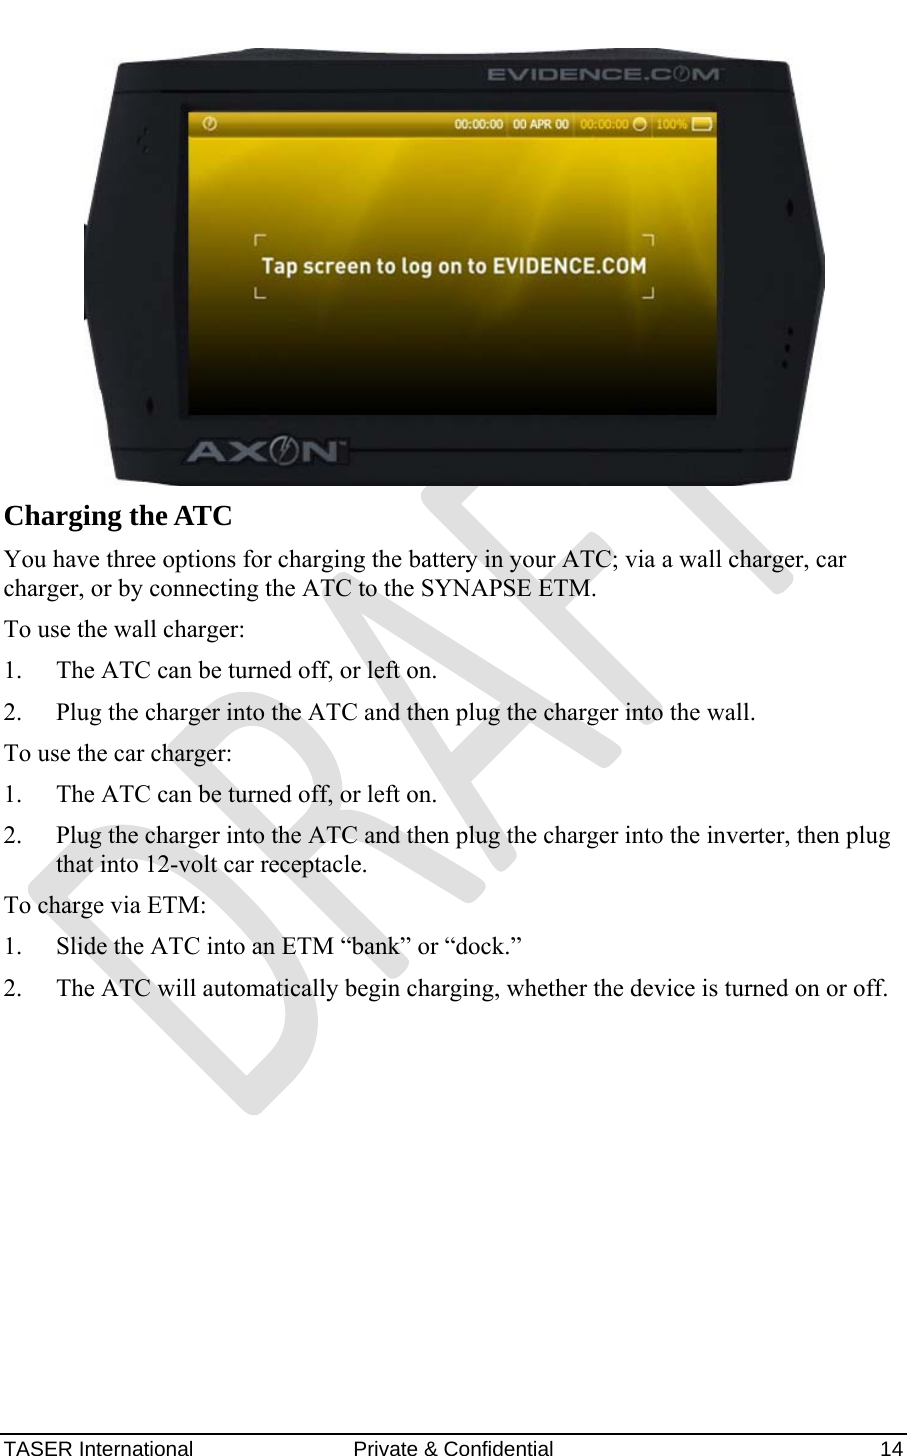 AXON™  4 Jan 2010 TASER International  Private &amp; Confidential    14  Charging the ATC You have three options for charging the battery in your ATC; via a wall charger, car charger, or by connecting the ATC to the SYNAPSE ETM.  To use the wall charger: 1. The ATC can be turned off, or left on. 2. Plug the charger into the ATC and then plug the charger into the wall. To use the car charger: 1. The ATC can be turned off, or left on. 2. Plug the charger into the ATC and then plug the charger into the inverter, then plug that into 12-volt car receptacle. To charge via ETM: 1. Slide the ATC into an ETM “bank” or “dock.” 2. The ATC will automatically begin charging, whether the device is turned on or off.    